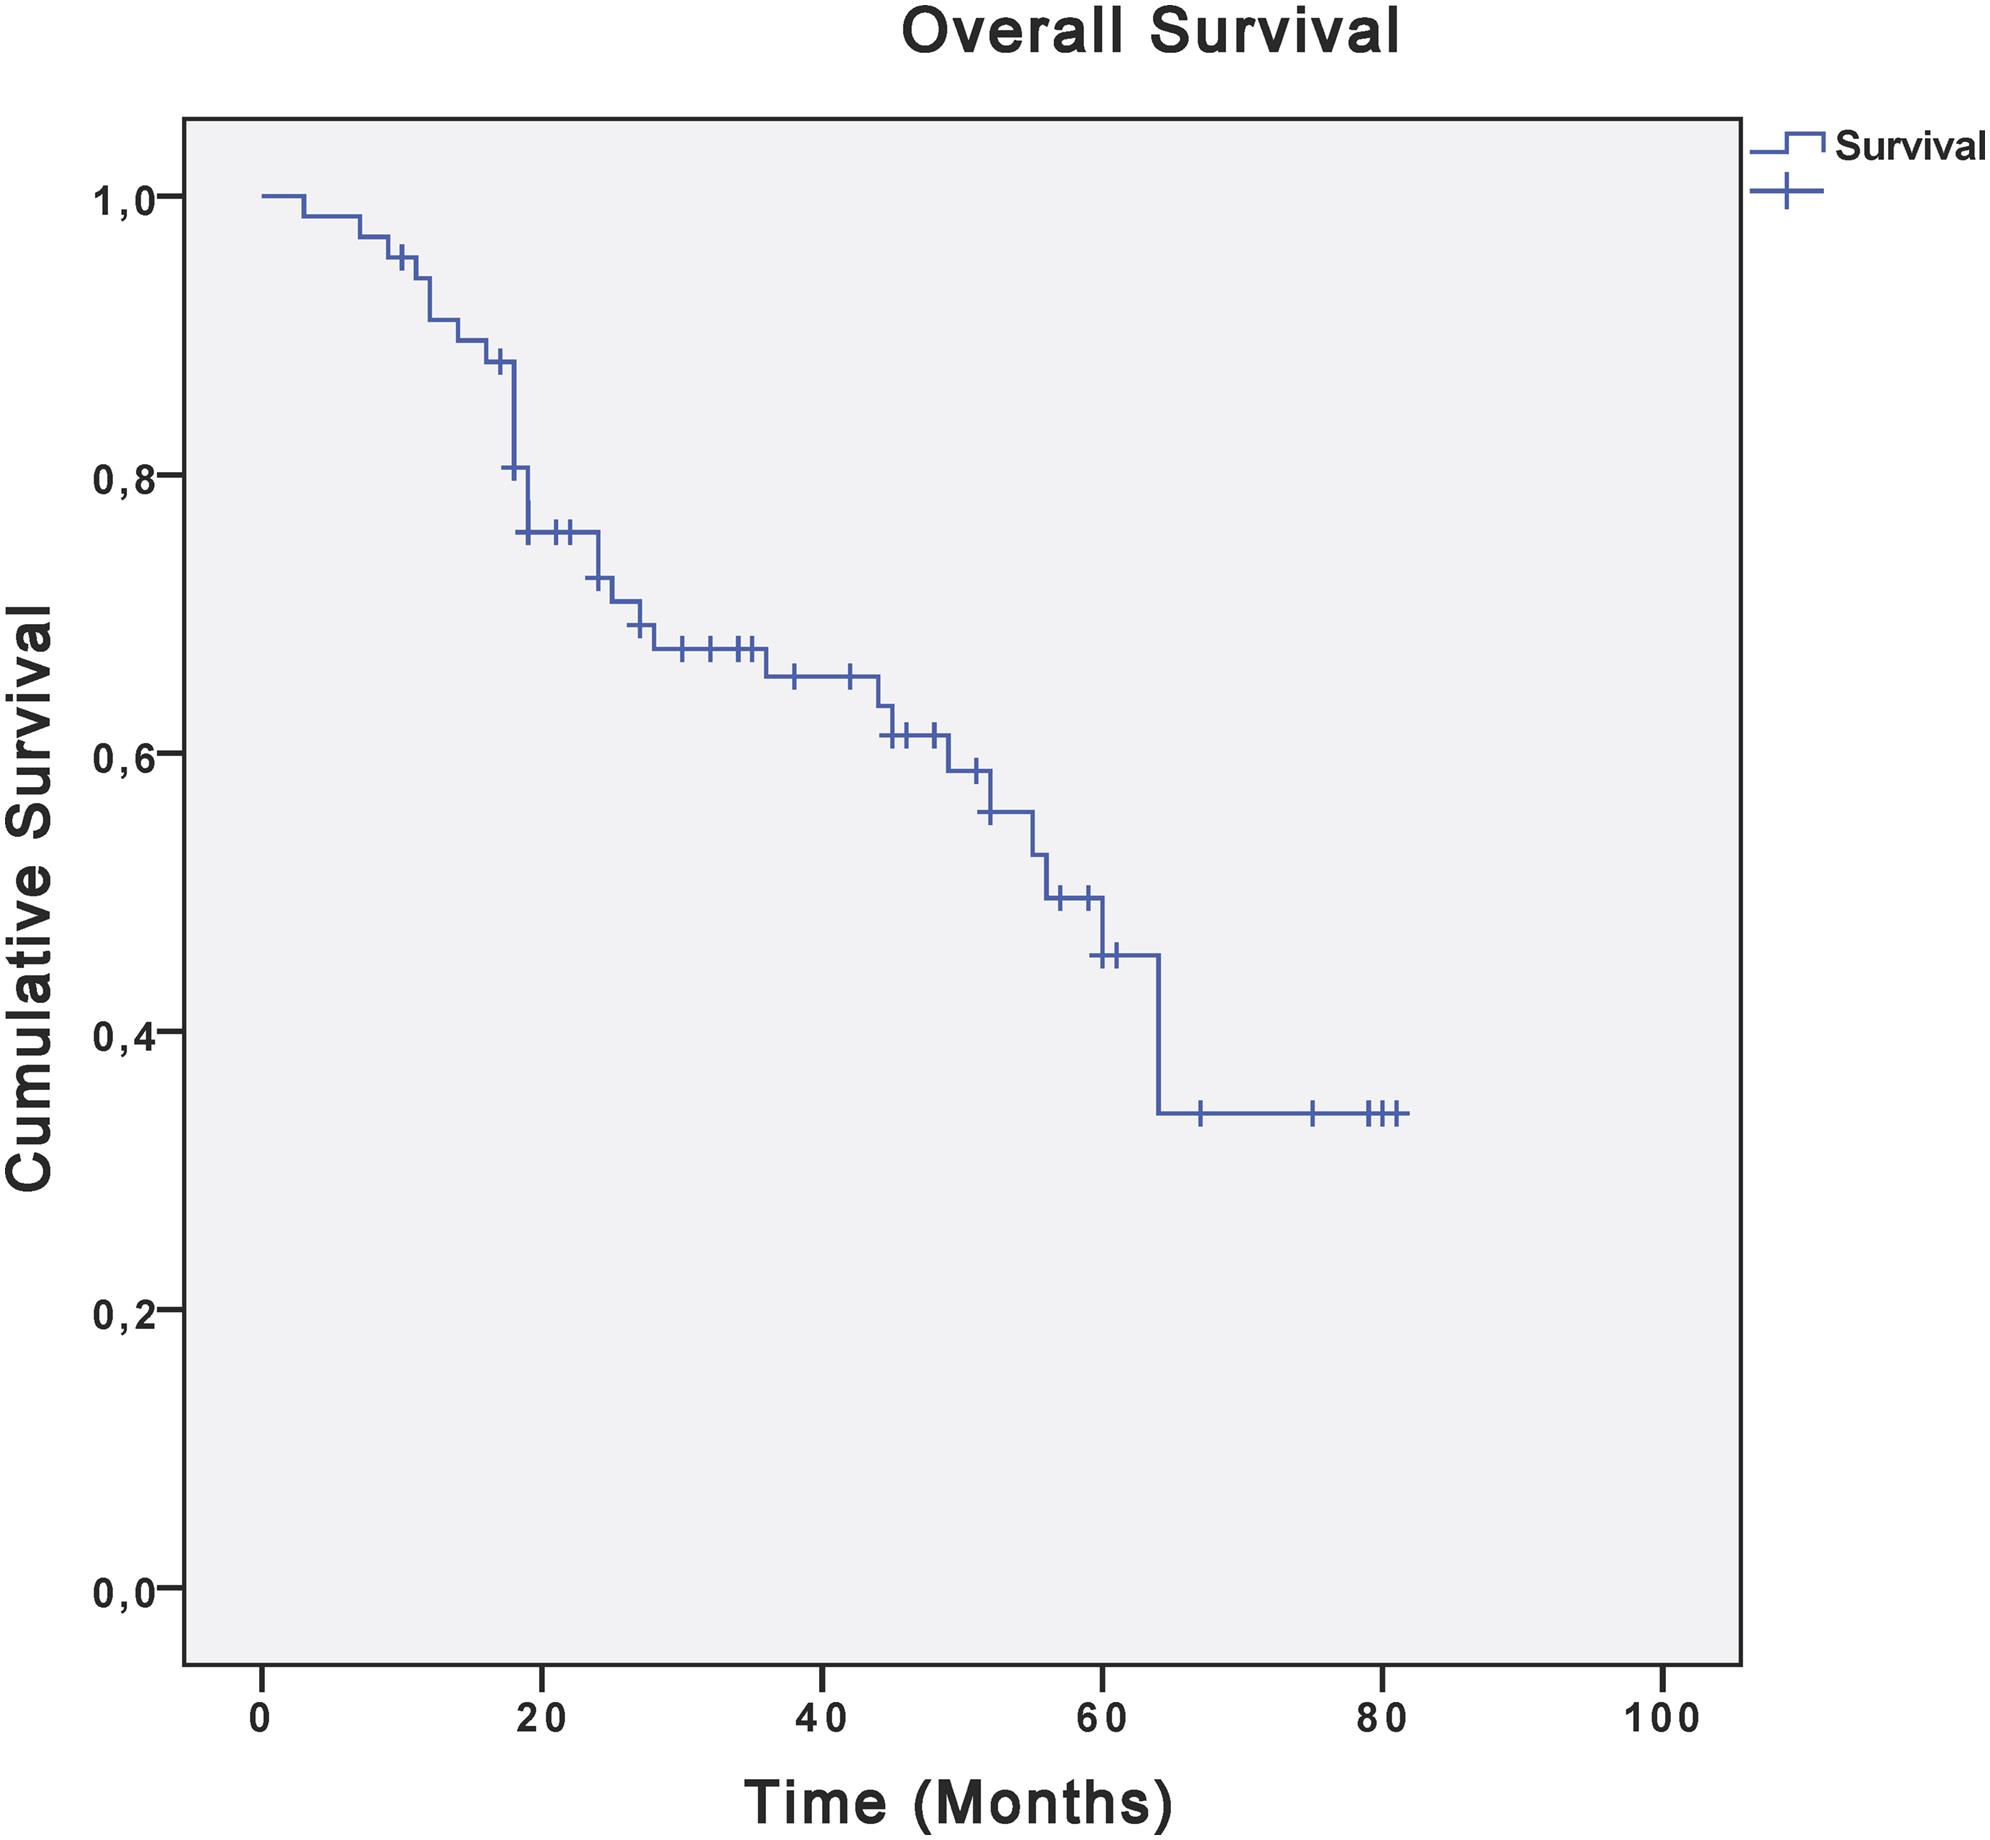 Overall Survival of all patients.